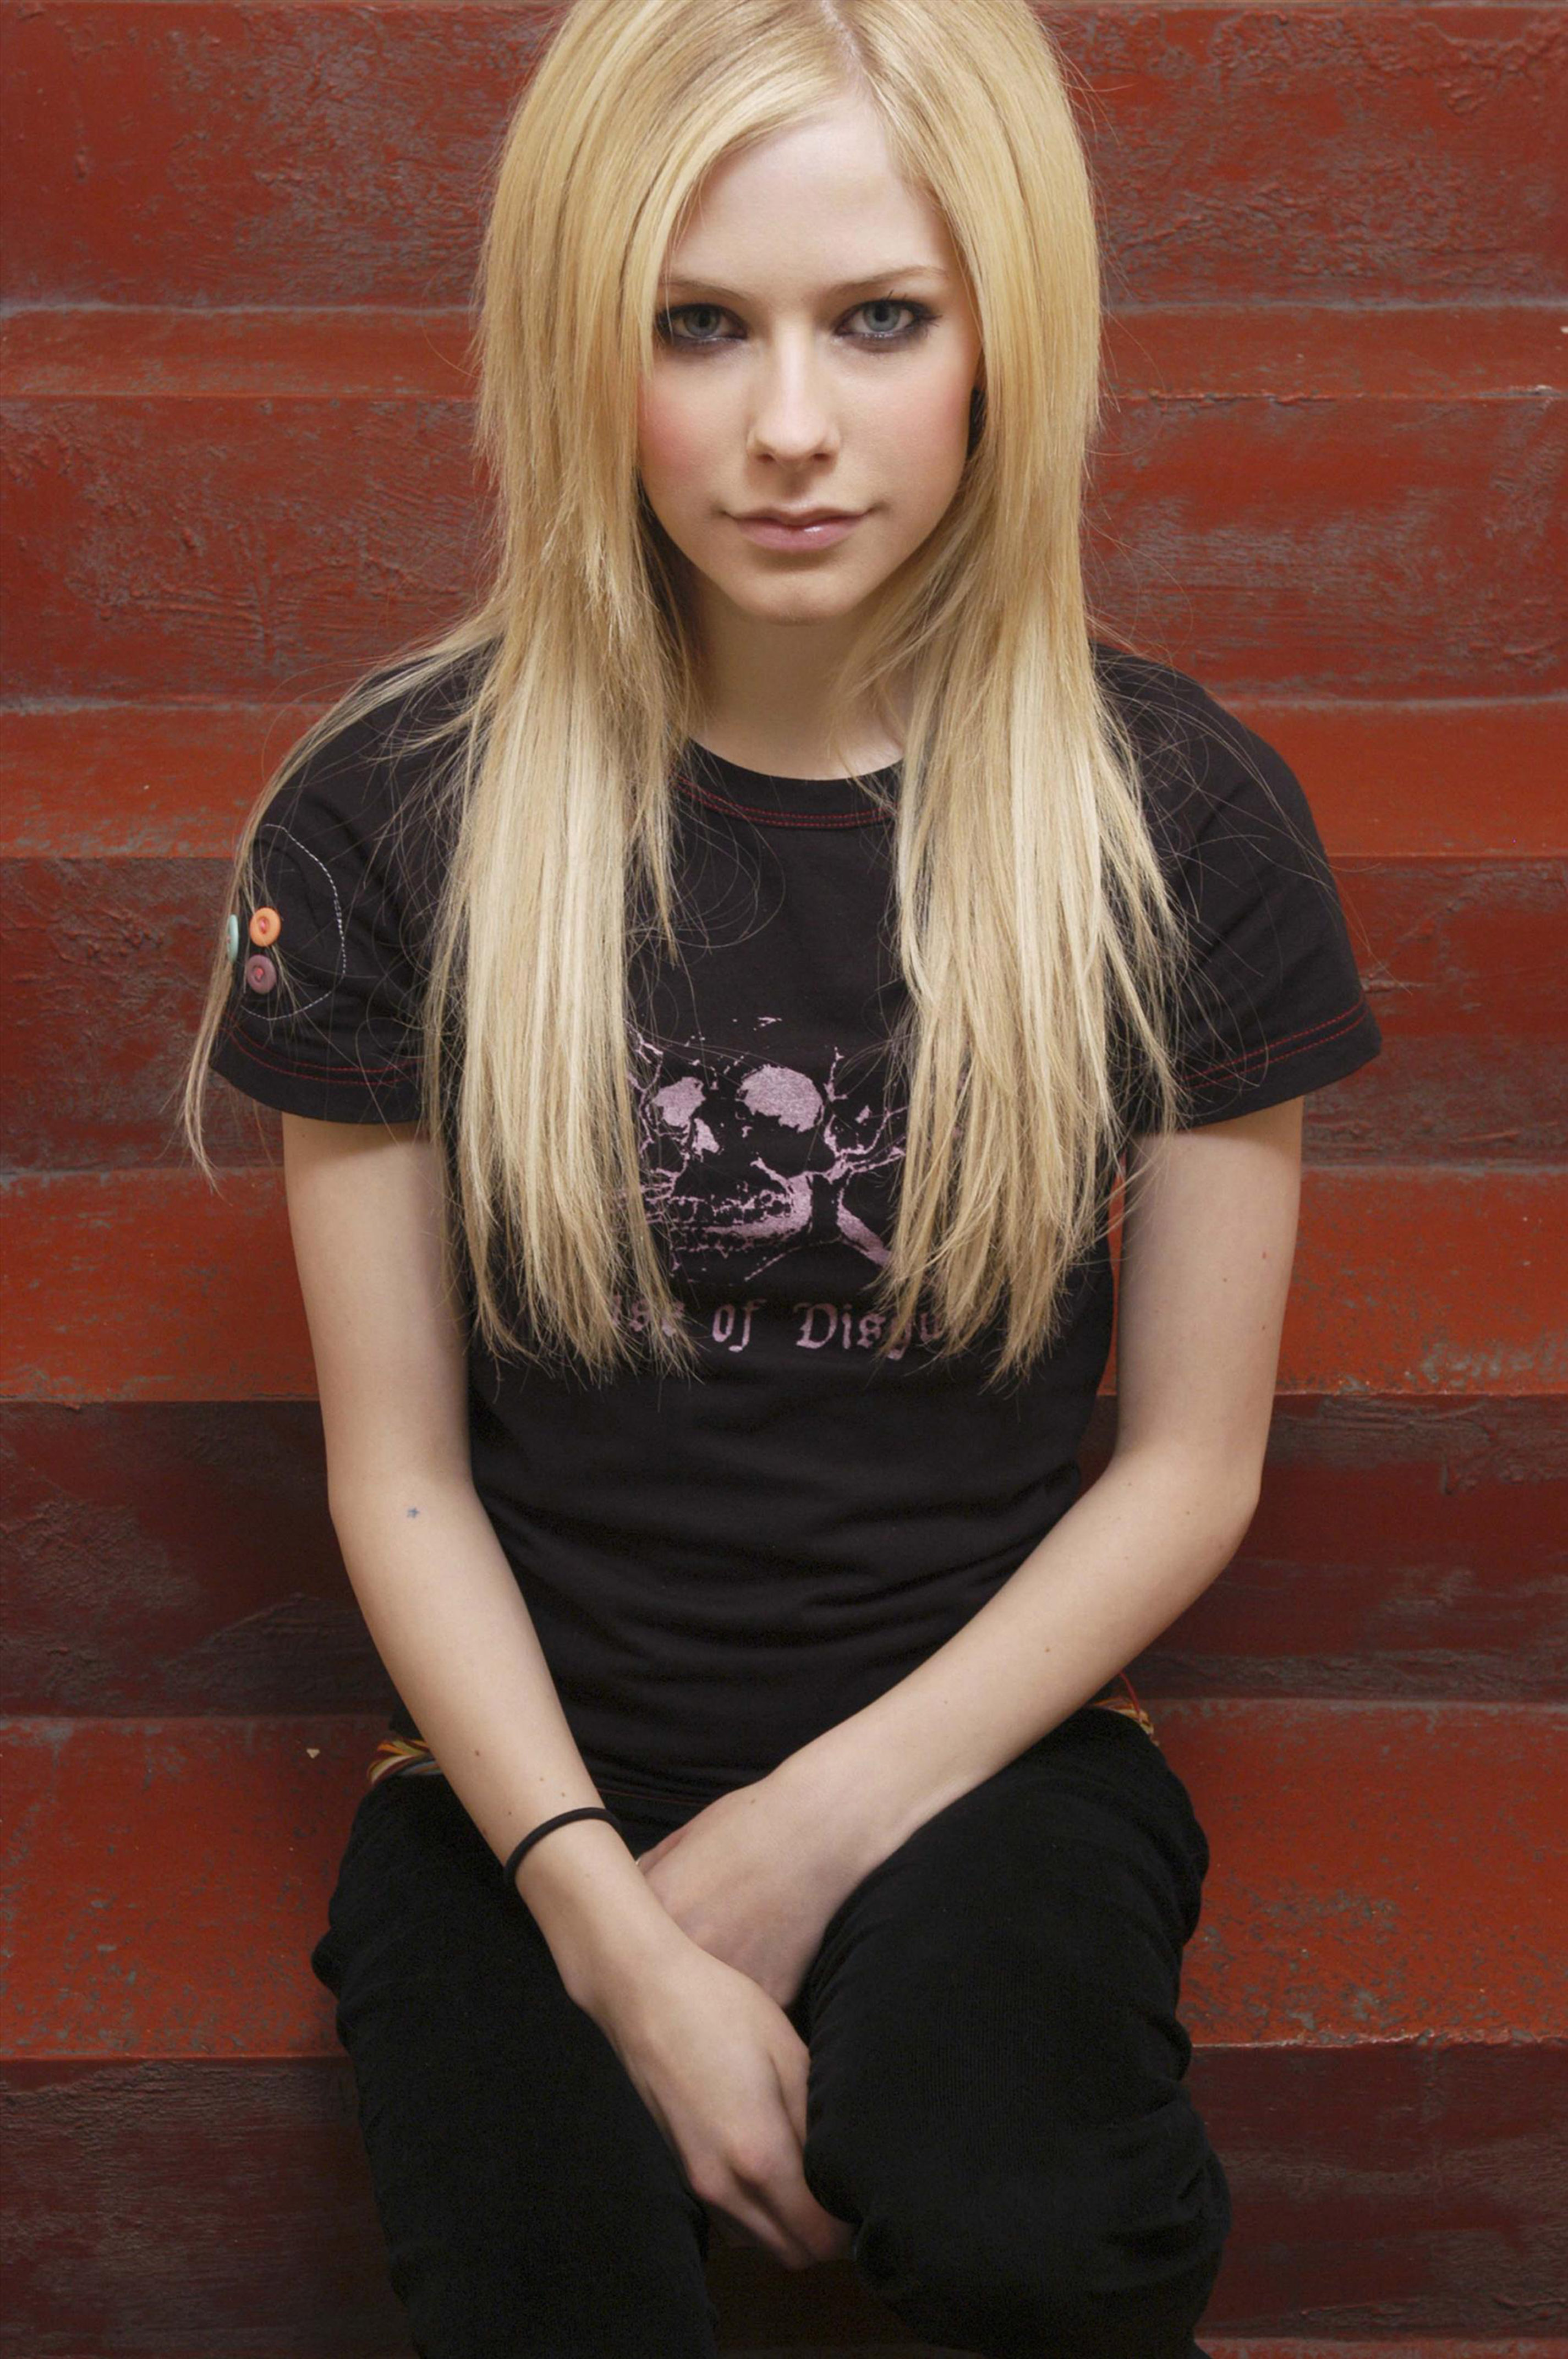 Female Singers Avril Lavigne Pictures Gallery 6